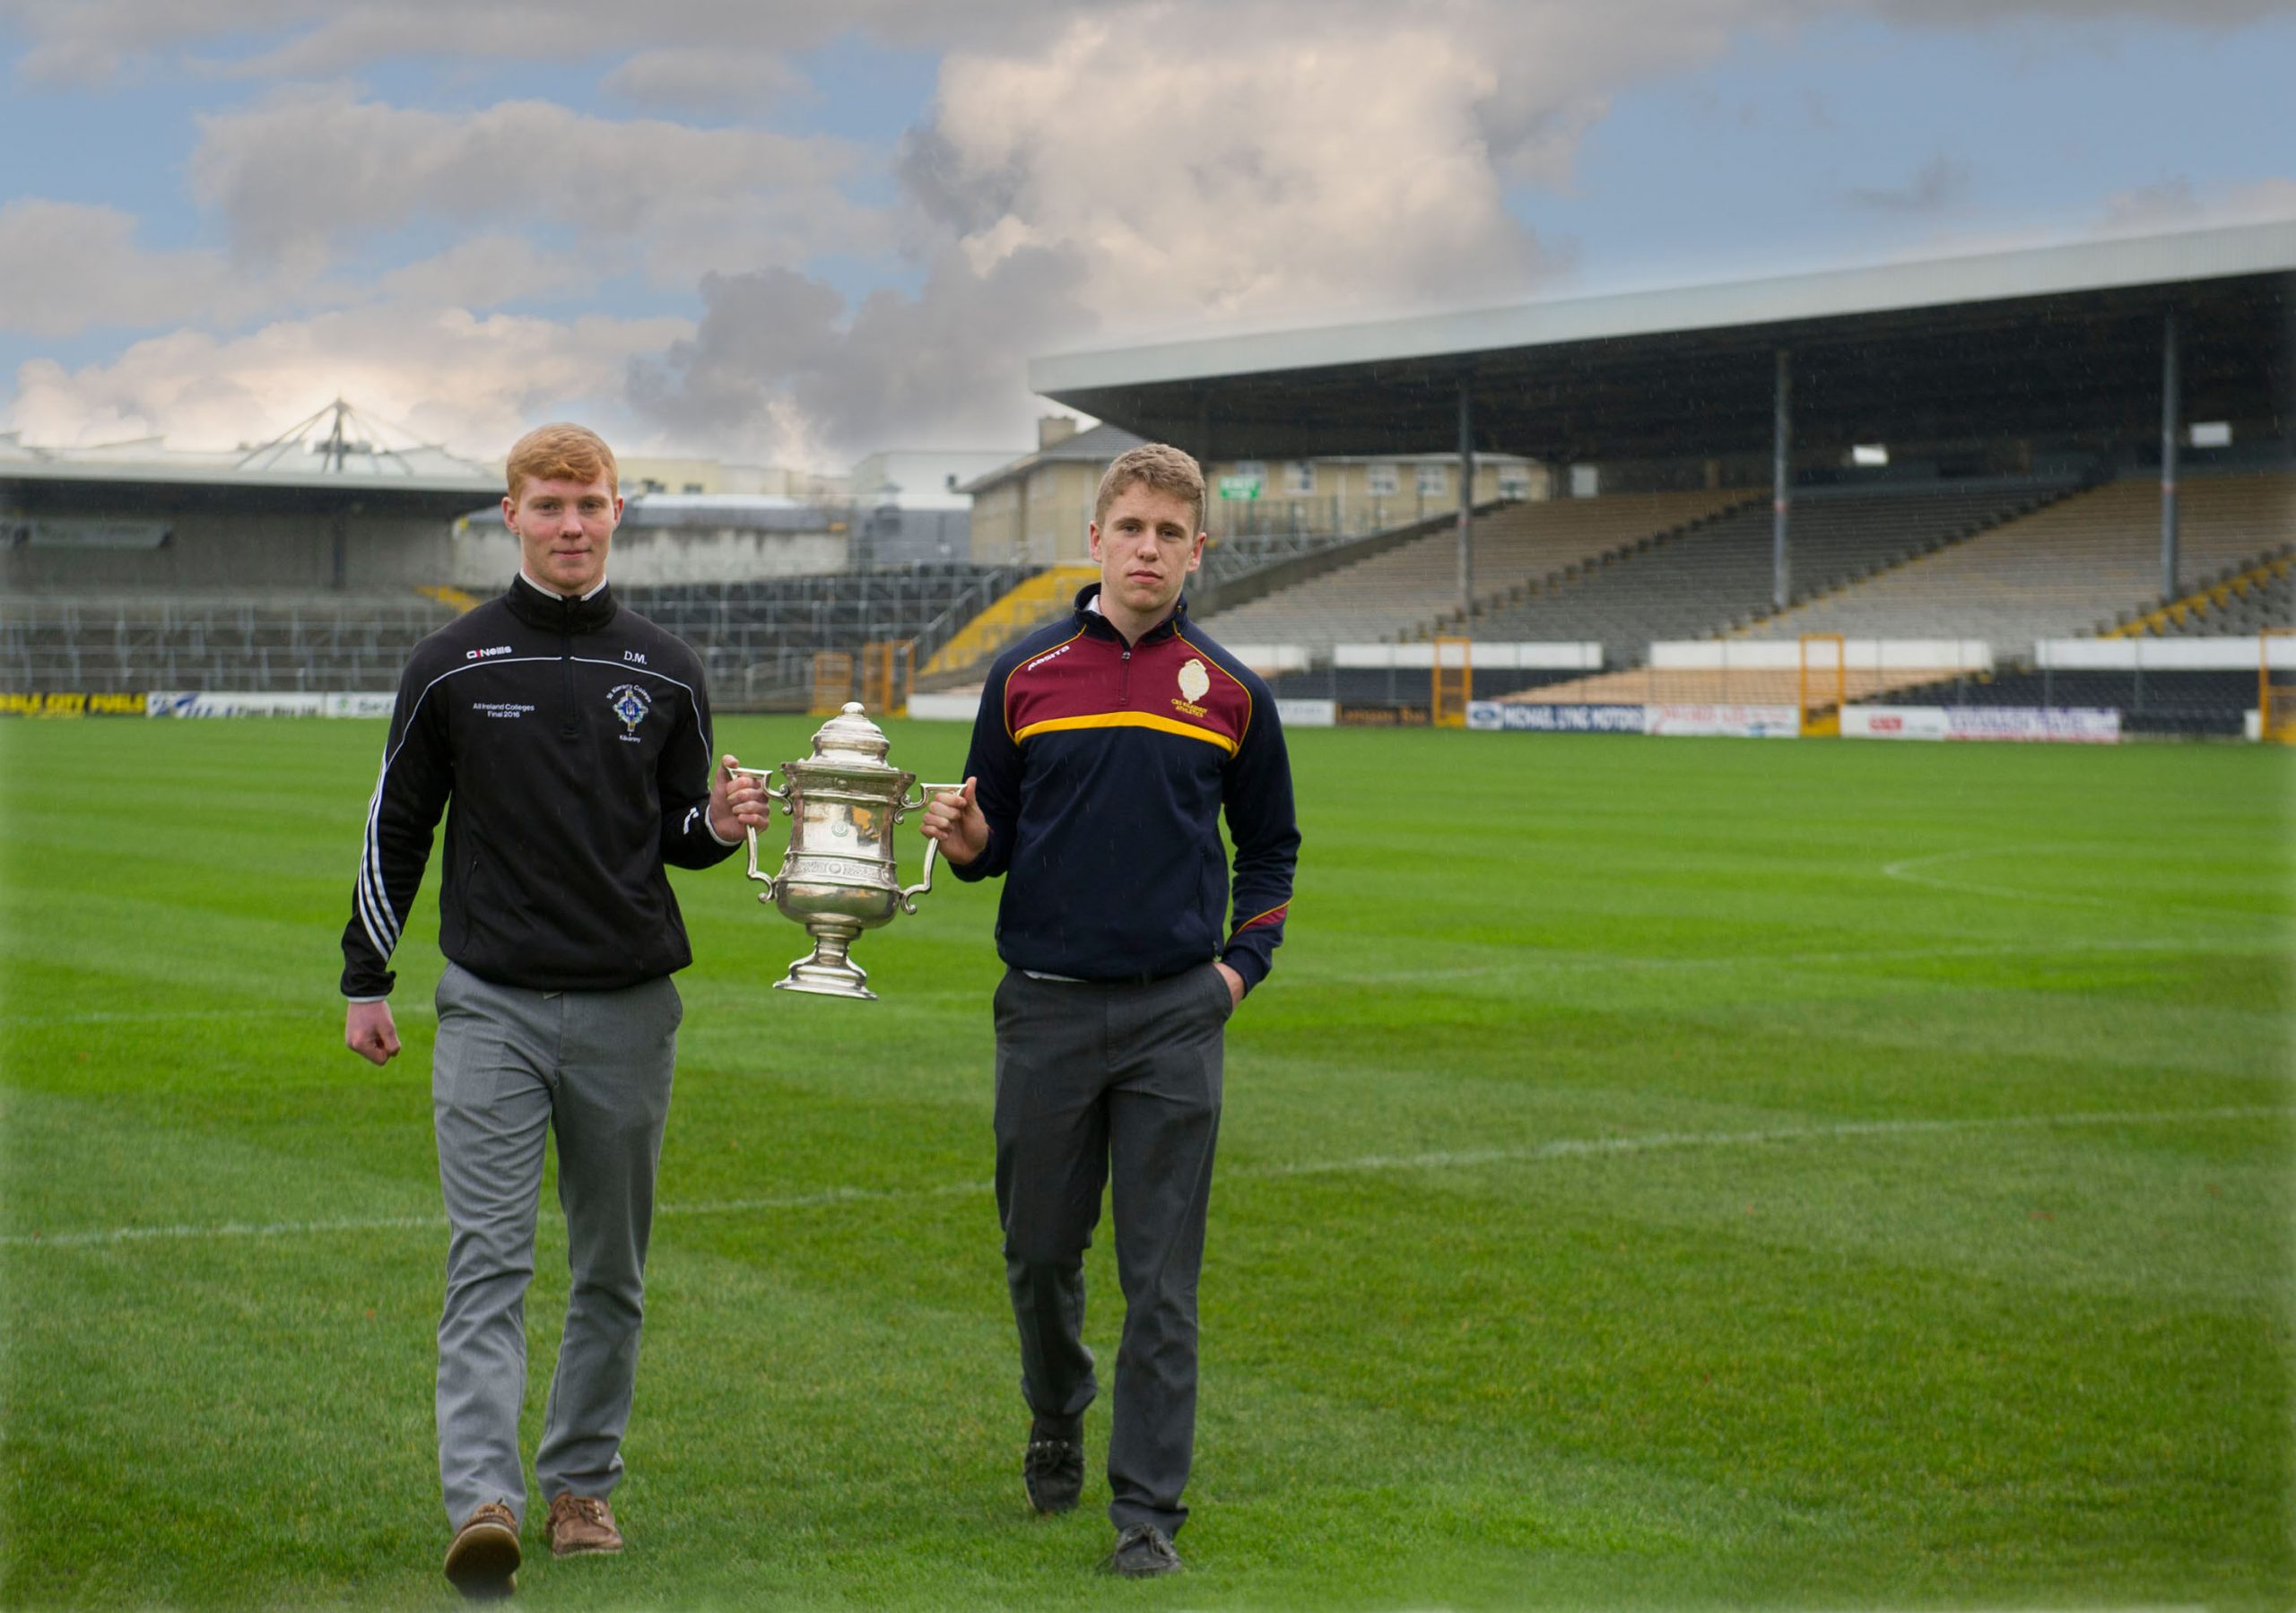 St Kierans and CBS in Leinster Final in Nowlan Park